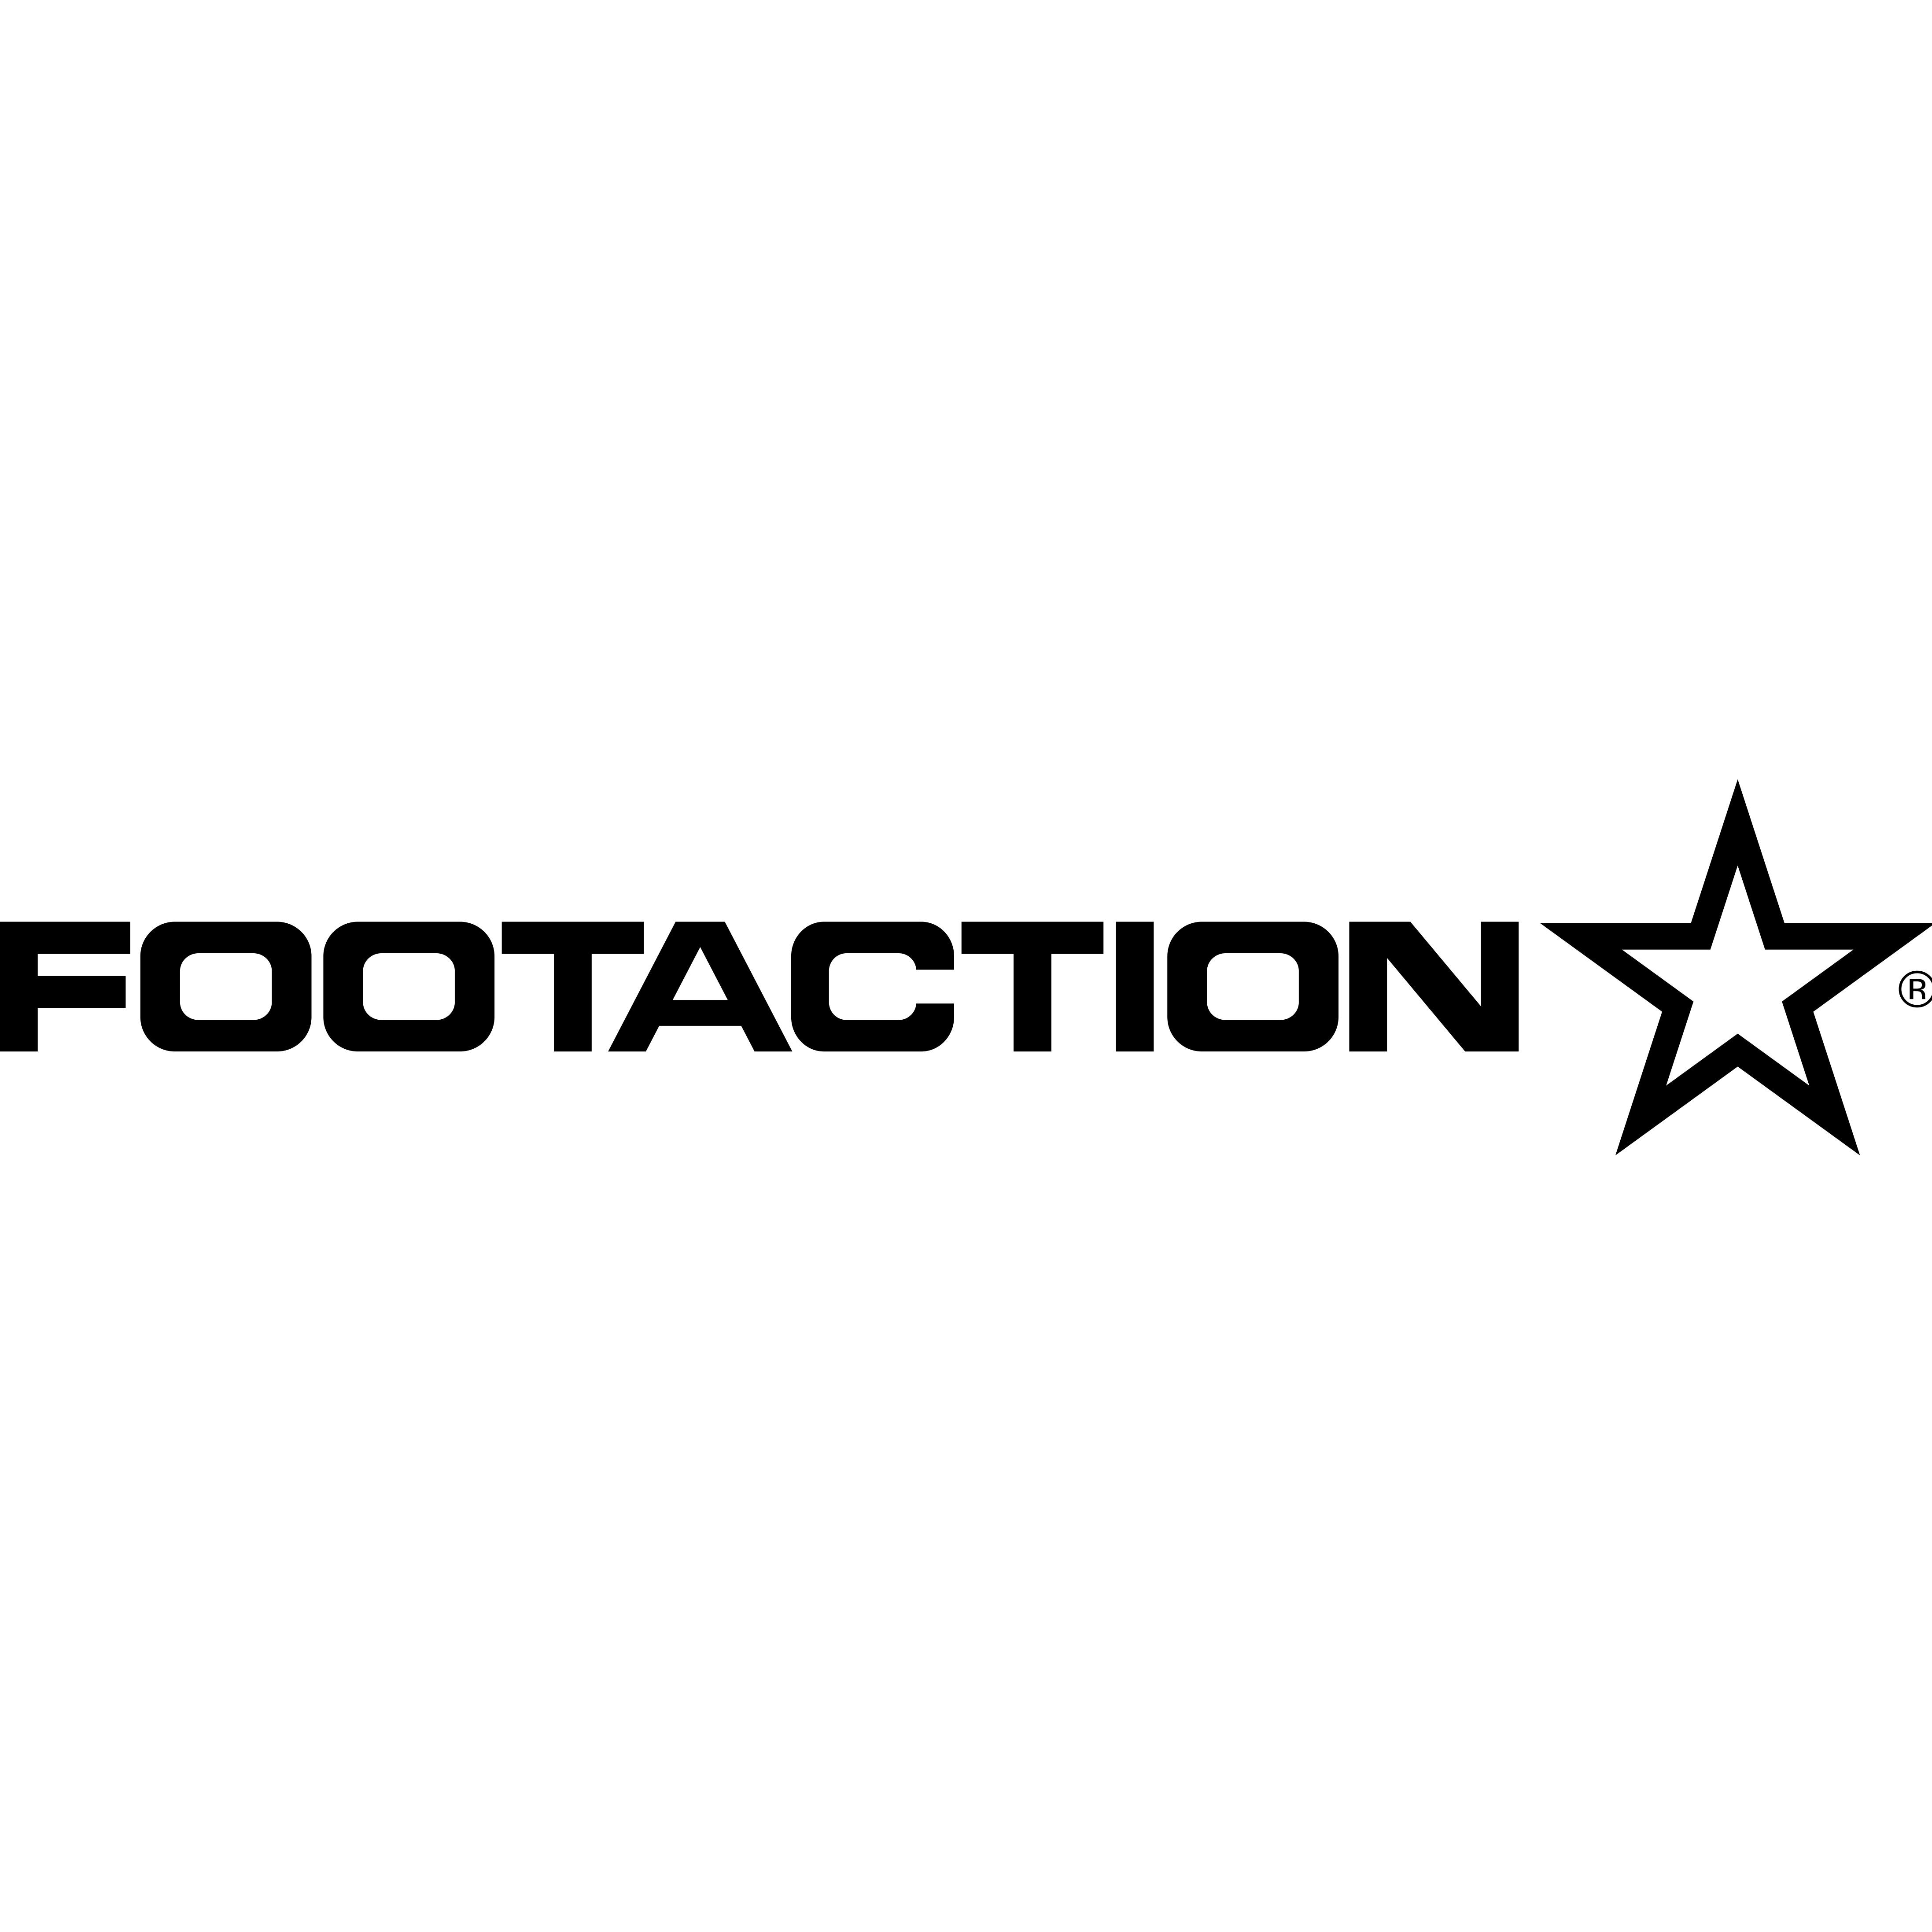 Footaction - CLOSED